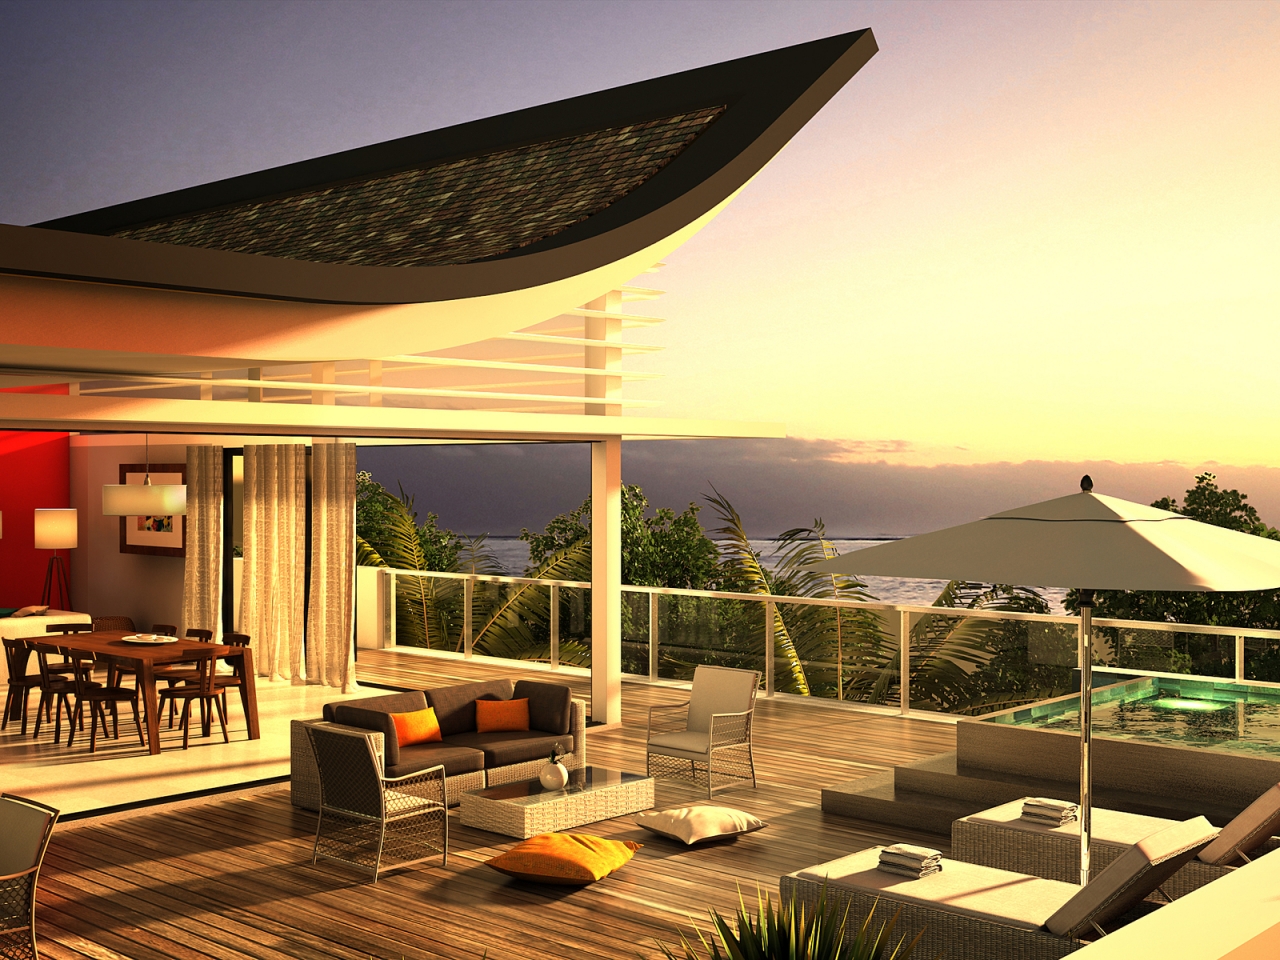 Luxury Villa Terrace View for 1280 x 960 resolution